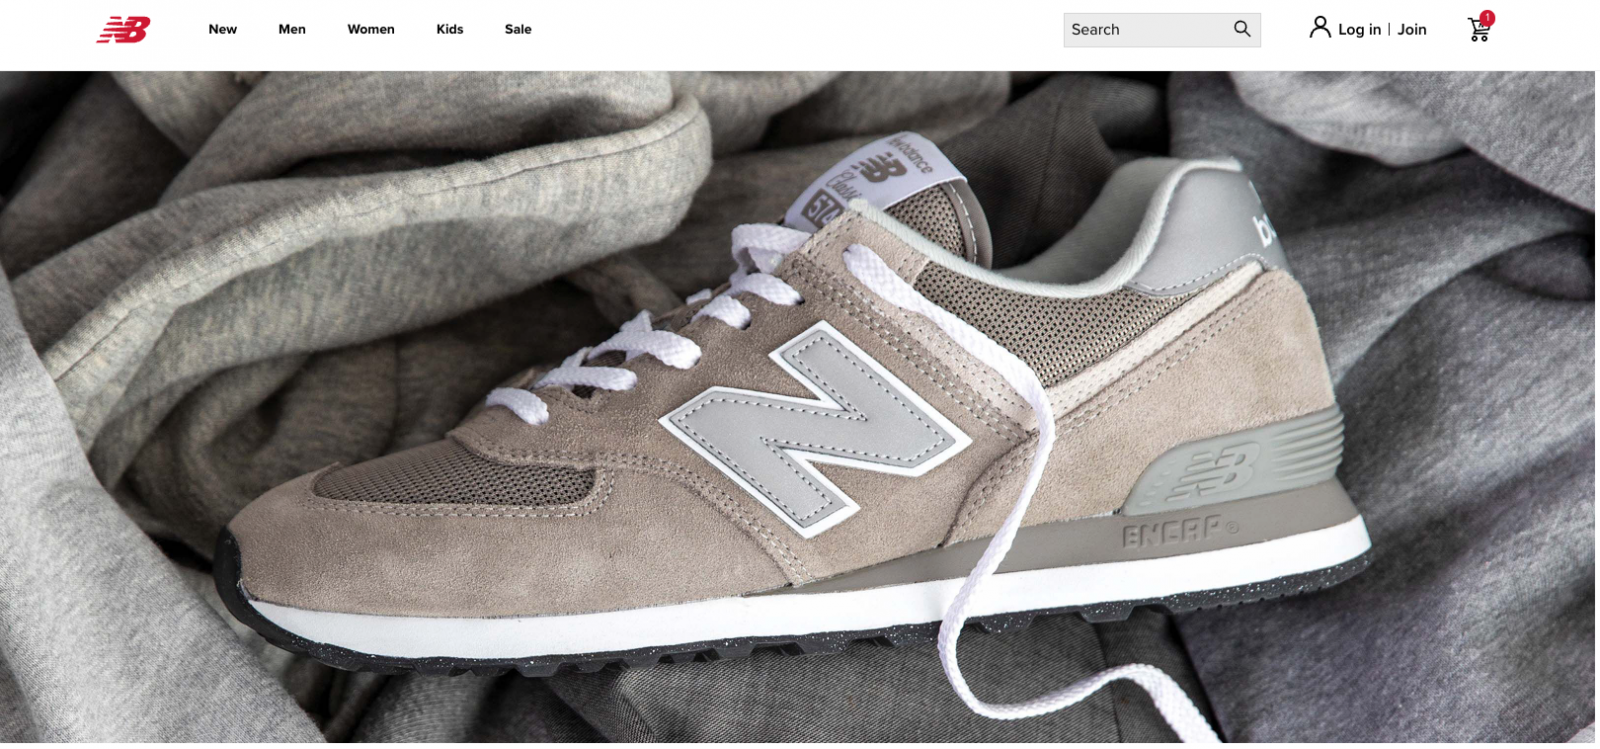 How to save at New Balance?